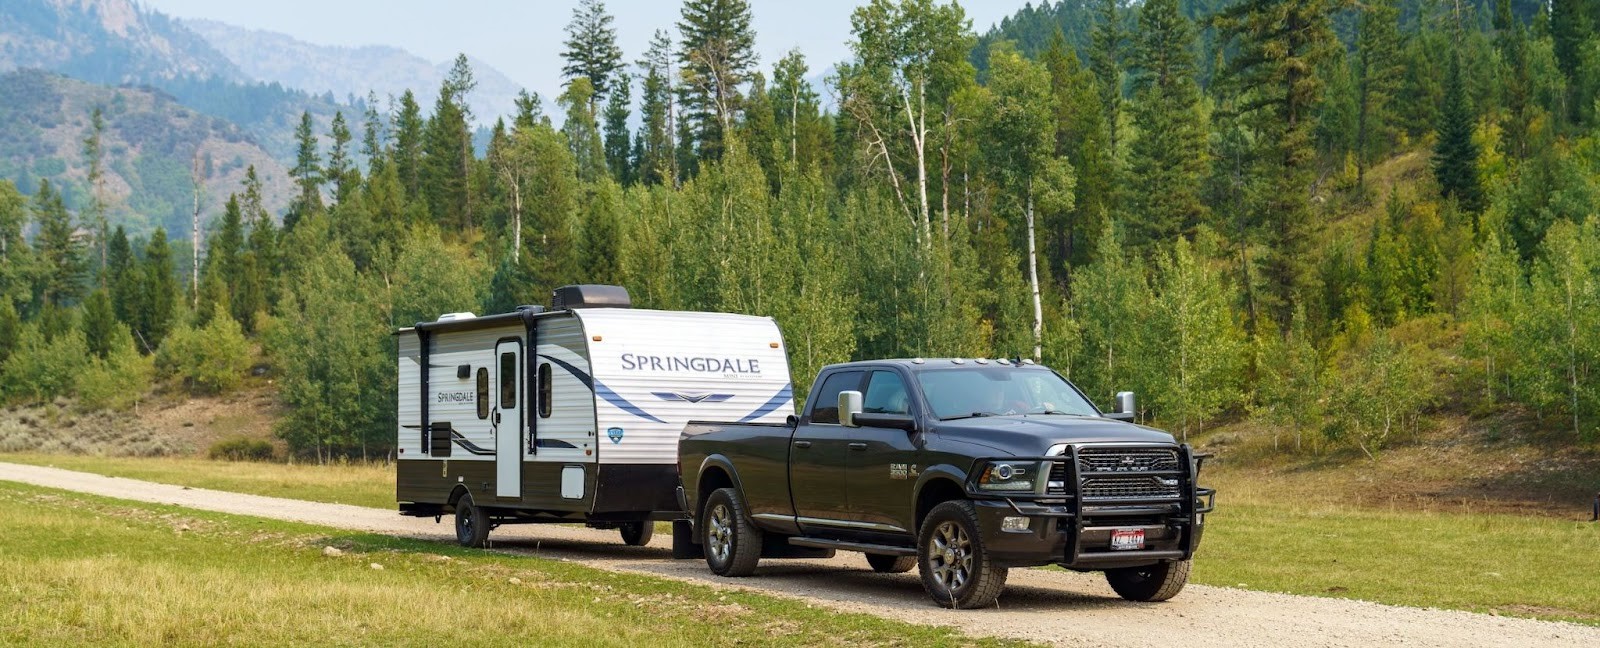 Dodge RAM pickup truck towing a Springdale fifth wheel camper on a mountain road